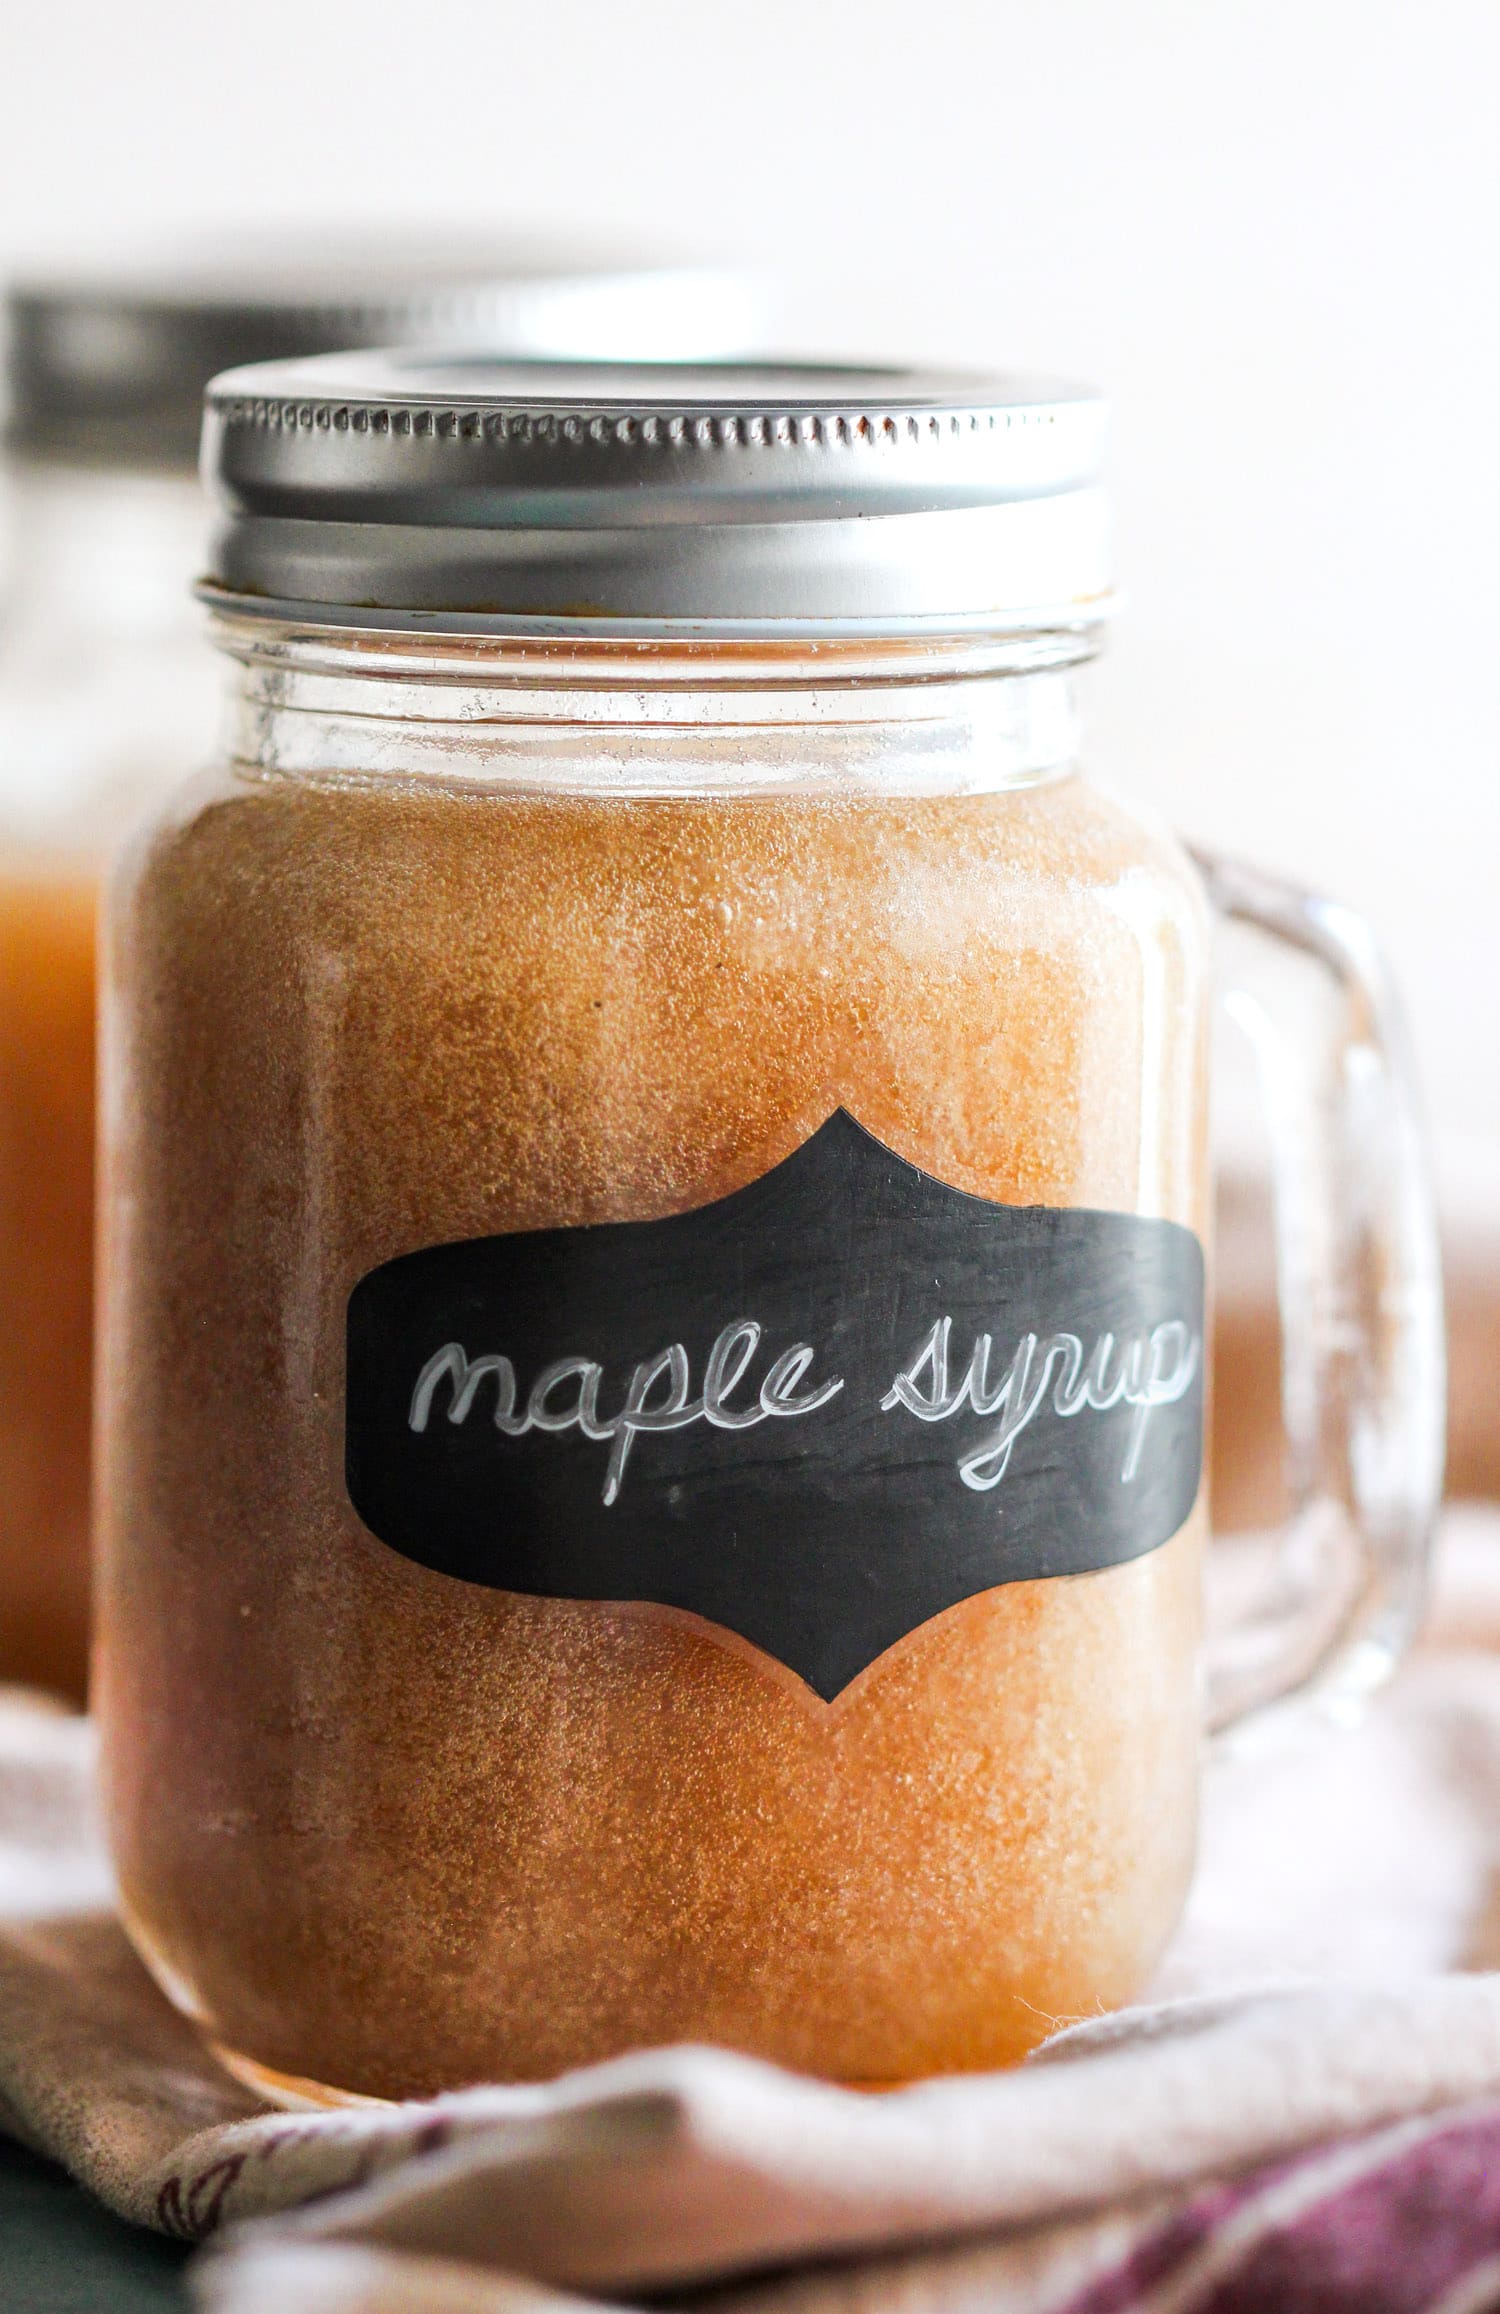 (How to Make Maple Syrup) This Healthy Homemade Sugar Free Maple Syrup tastes just like pure maple syrup, except it's sugar free, low carb, and only 2 calories per tablespoon! Perfect for topping pancakes, waffles, oatmeal, yogurt, and more! Healthy Dessert Recipes with sugar free, low fat, high protein, gluten free, and vegan options at the Desserts With Benefits Blog (www.DessertsWithBenefits.com)